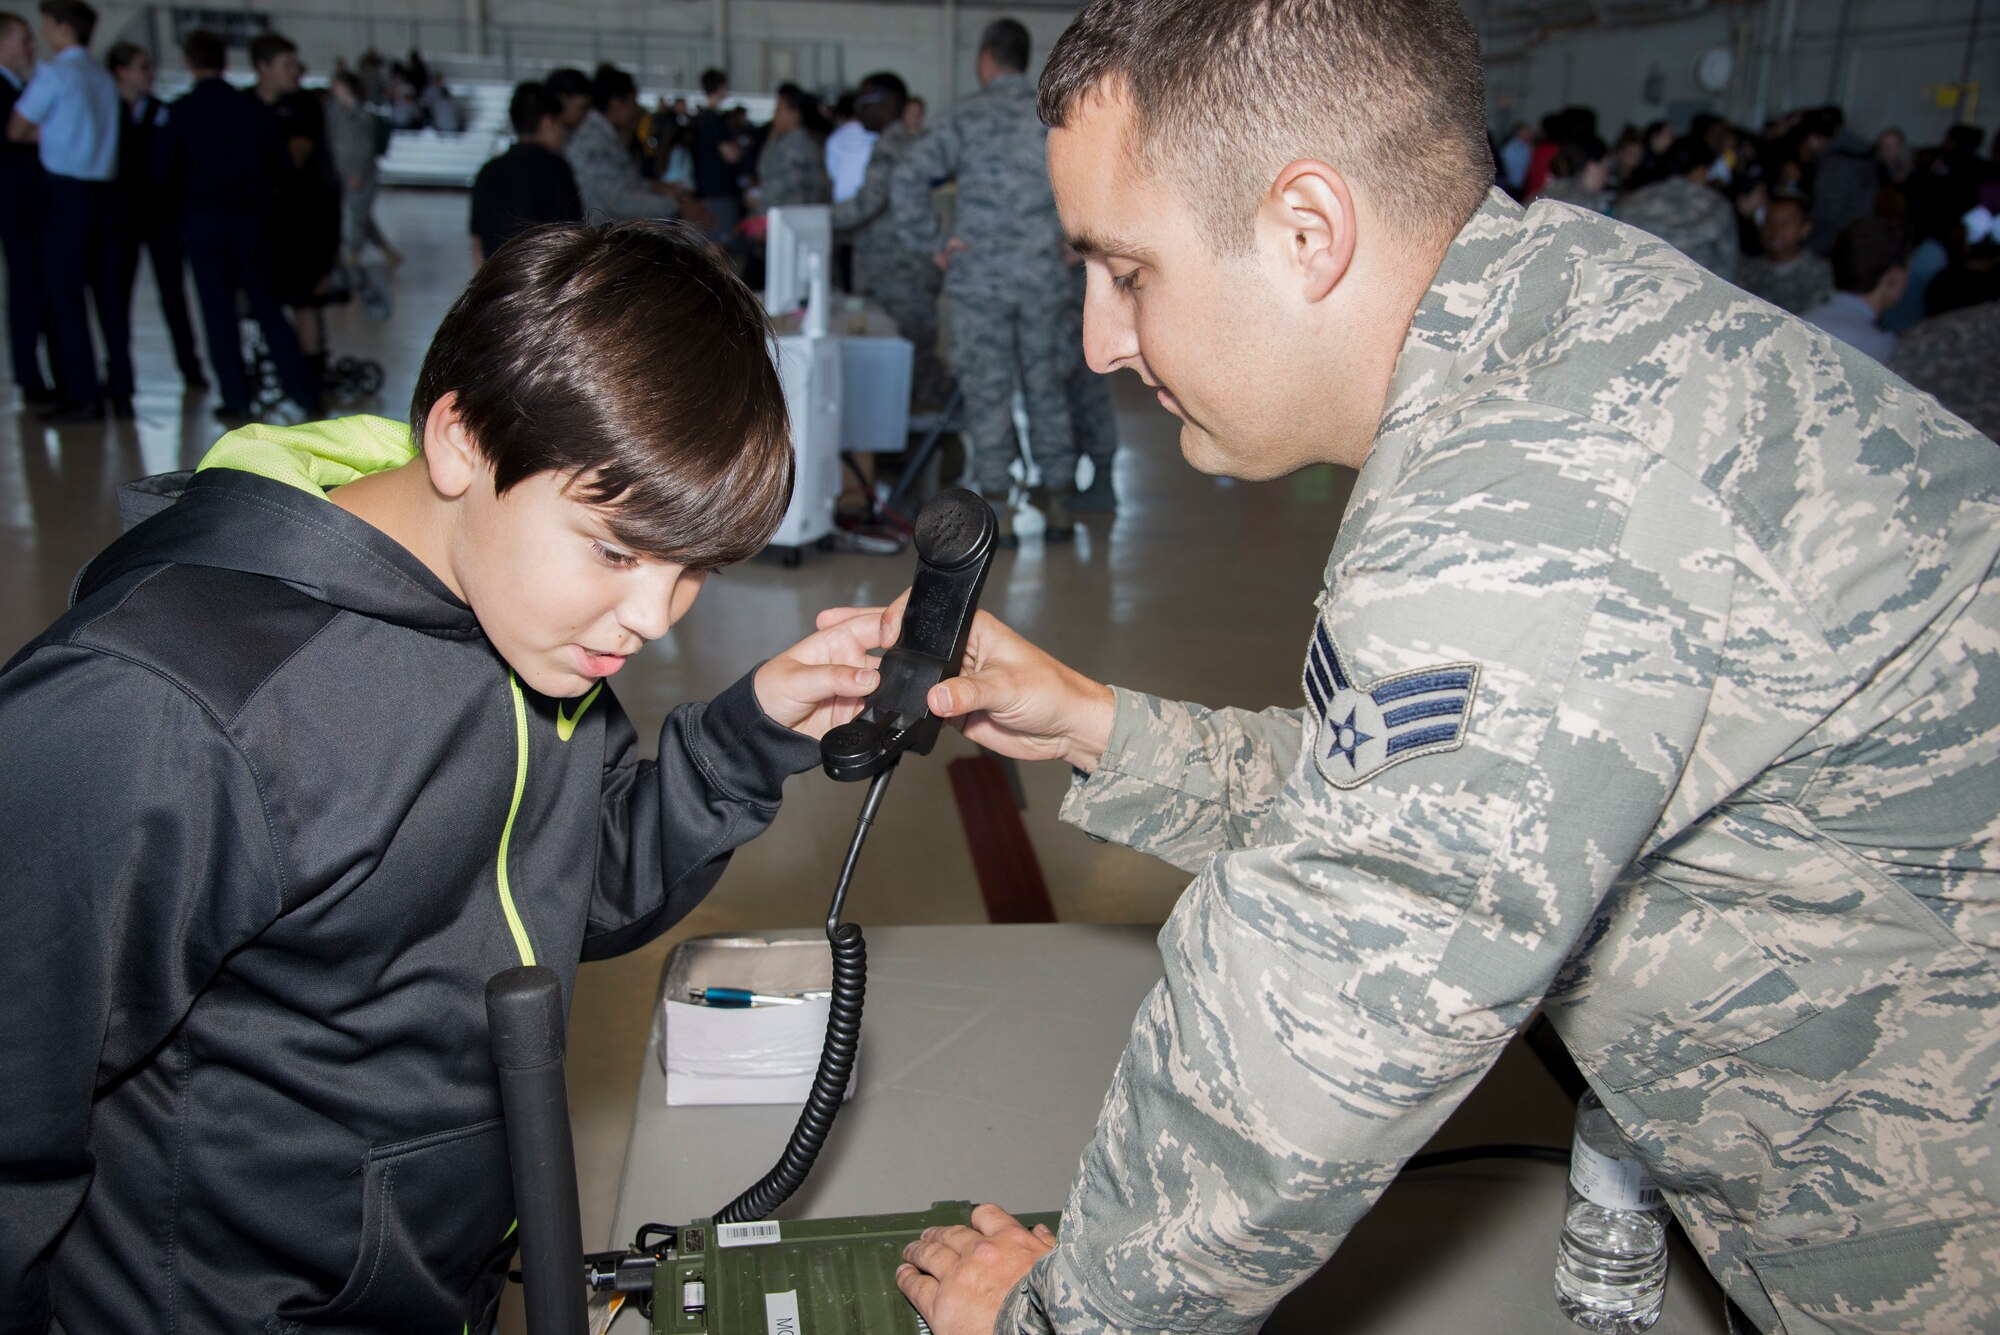 U.S. Air Force Senior Airman David Hamilton, a radio frequency transmission technician assigned to 6th Communication Squadron, demonstrates the use of a land mobile radio system during the Science, Technology, Engineering, Arts and Math (STEAM) Day at MacDill Air Force Base, Fla., March 21, 2018.